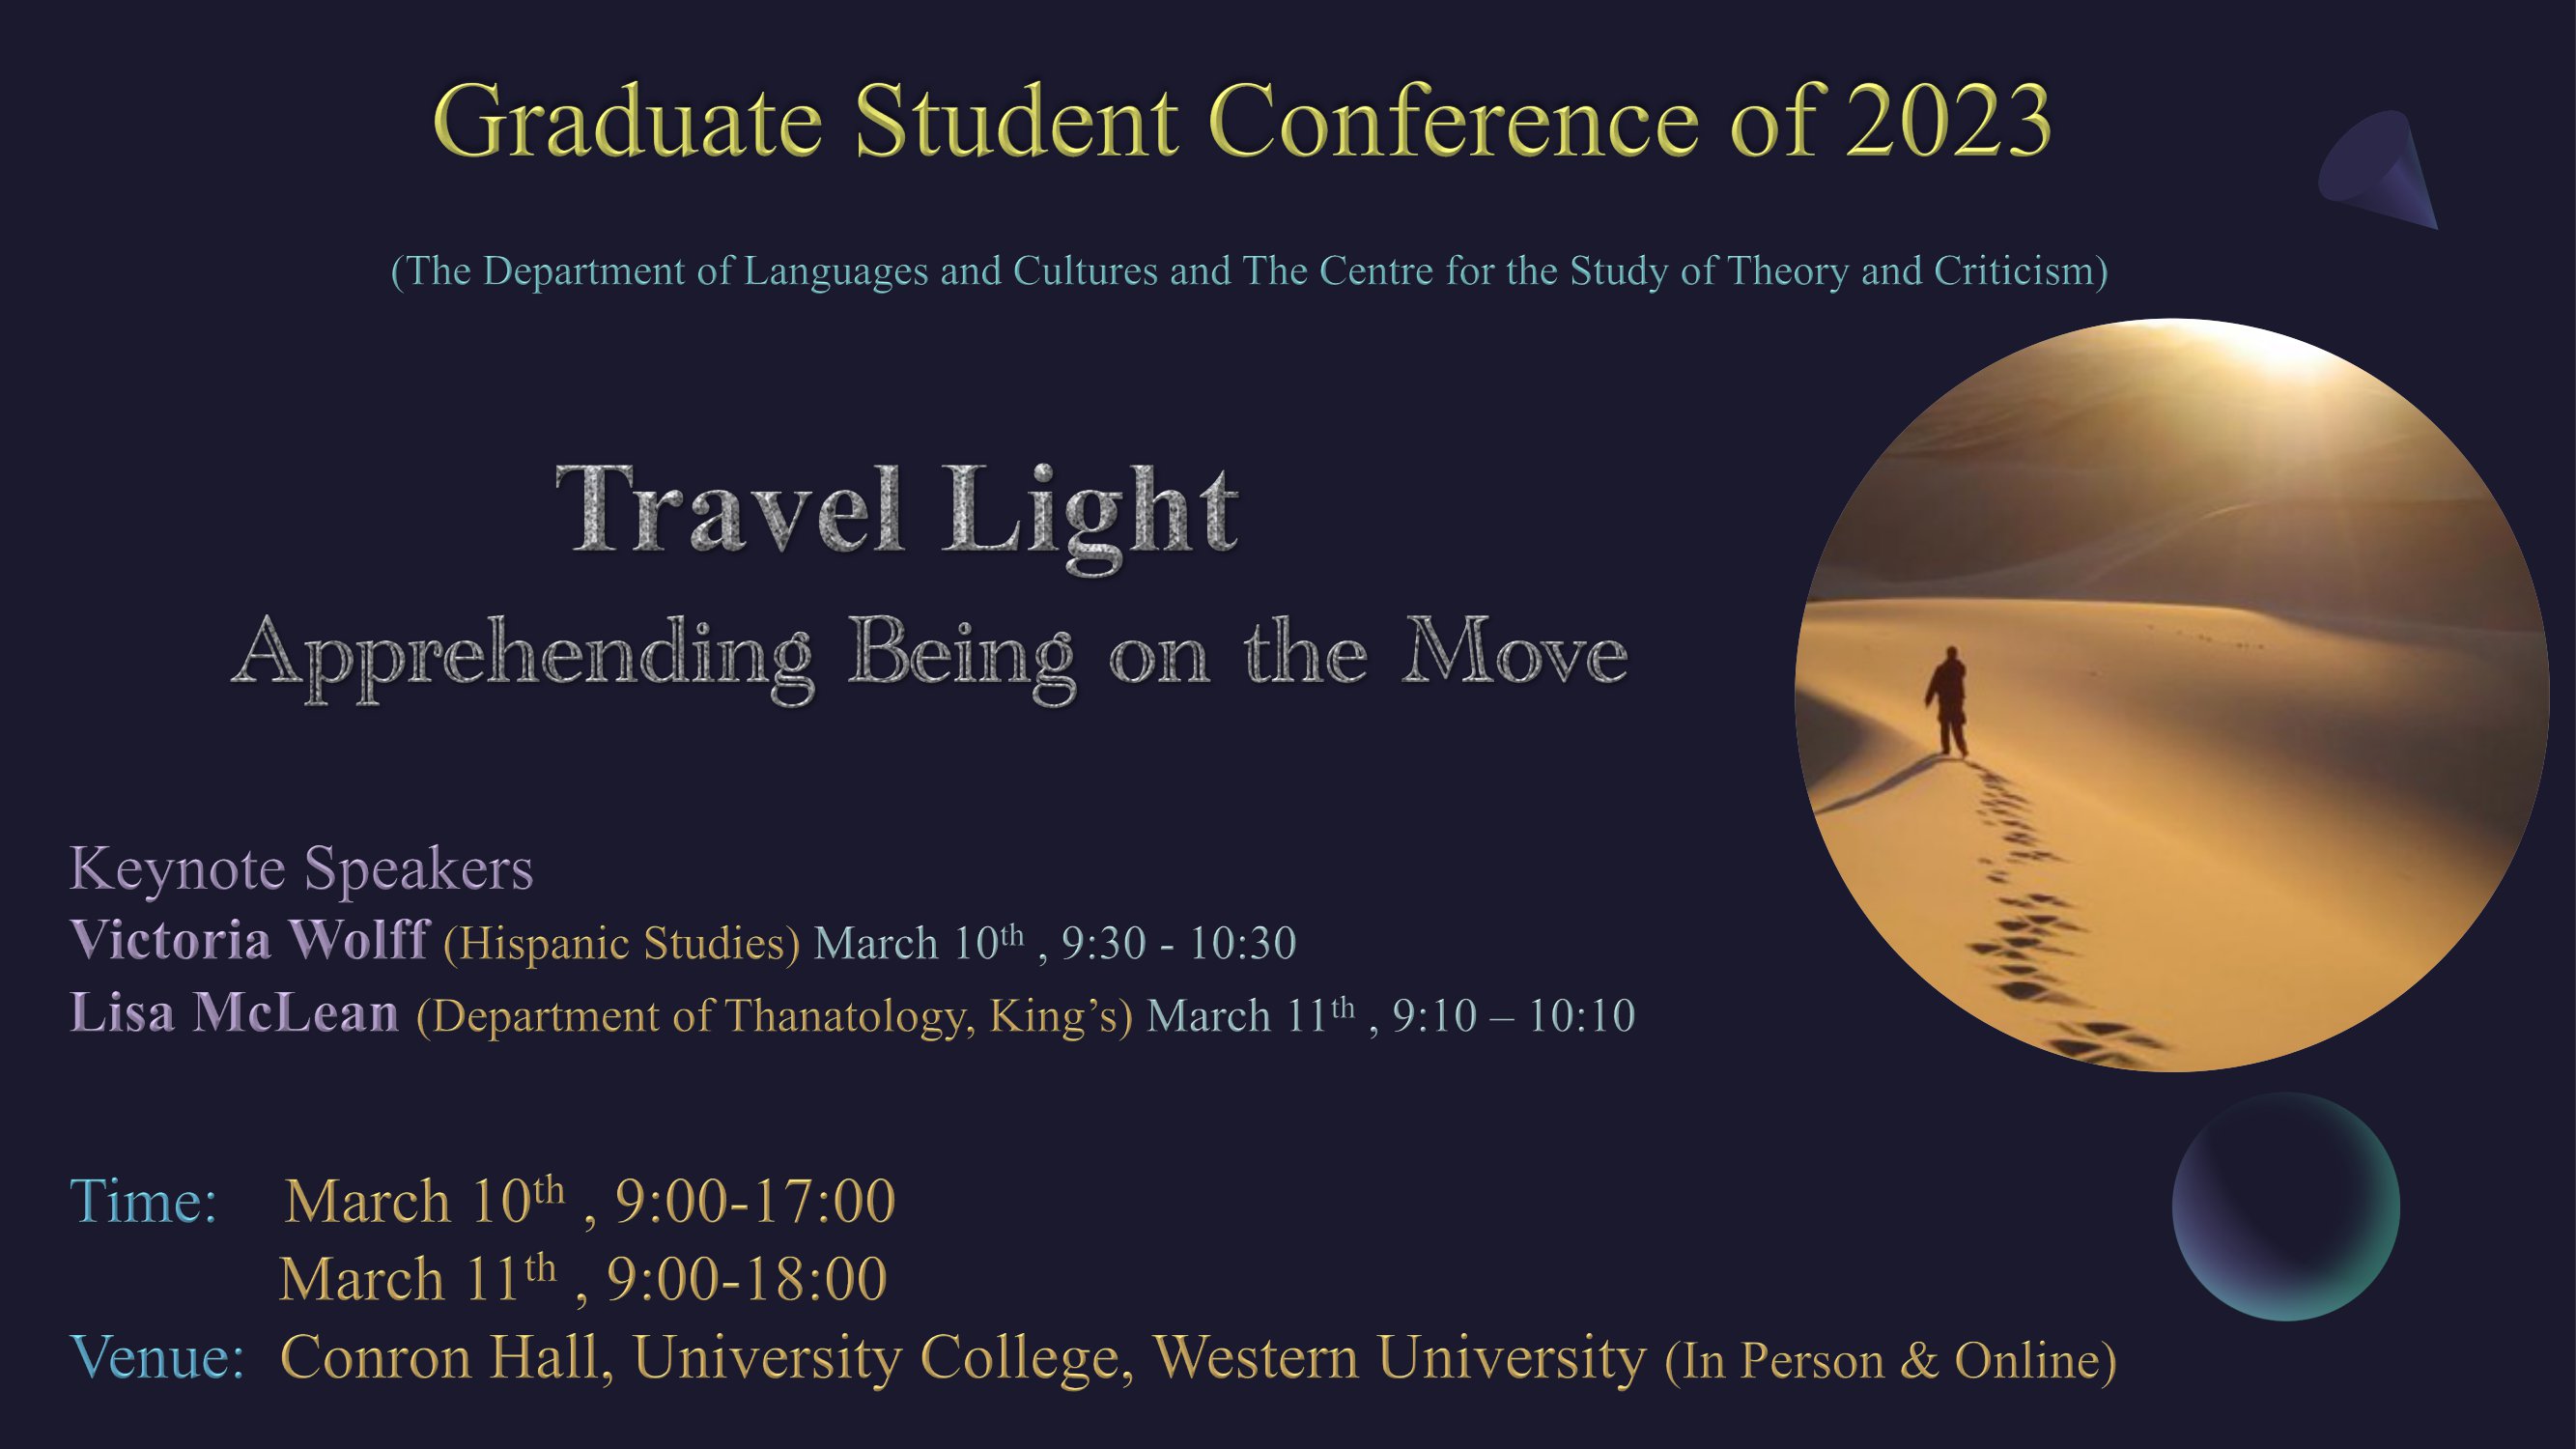 Travel Light 2023 conference poster